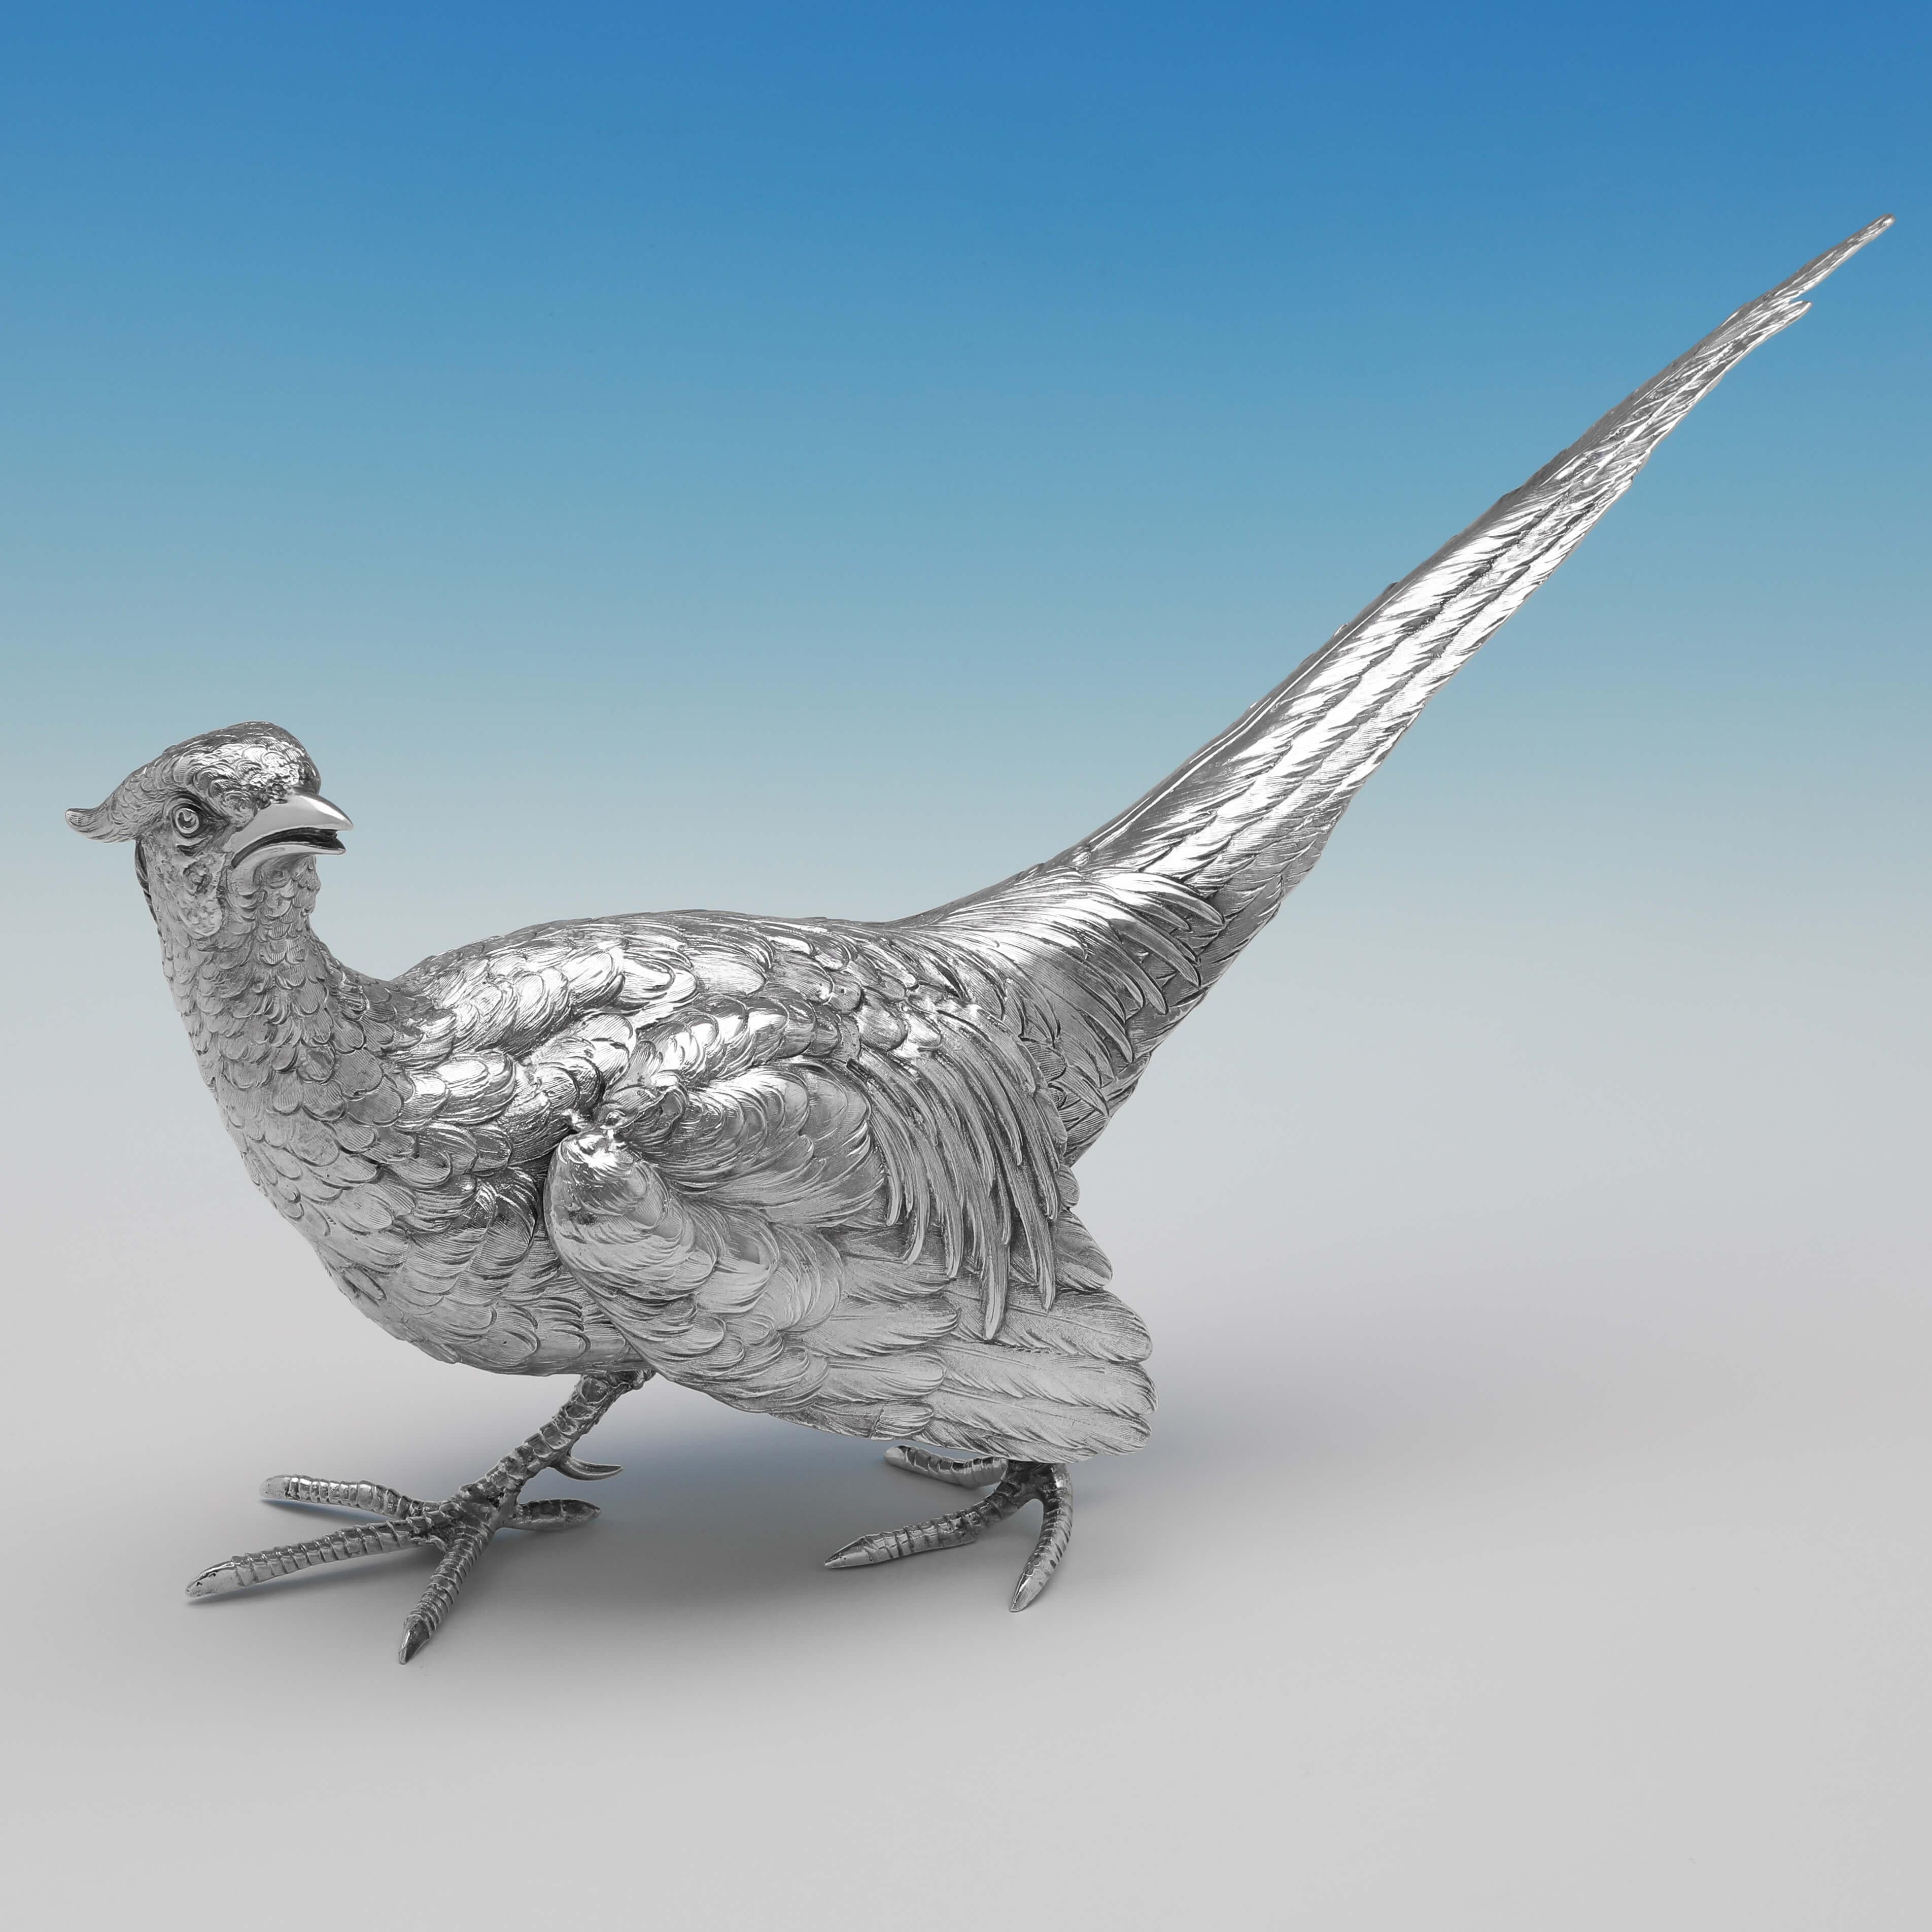 Carrying import marks for London in 1922 & Chester in 1909 by Berthold Muller, this striking pair of sterling silver pheasants, are realistically modelled and hand chased. The male (hallmarked in Chester) measures: 9.75